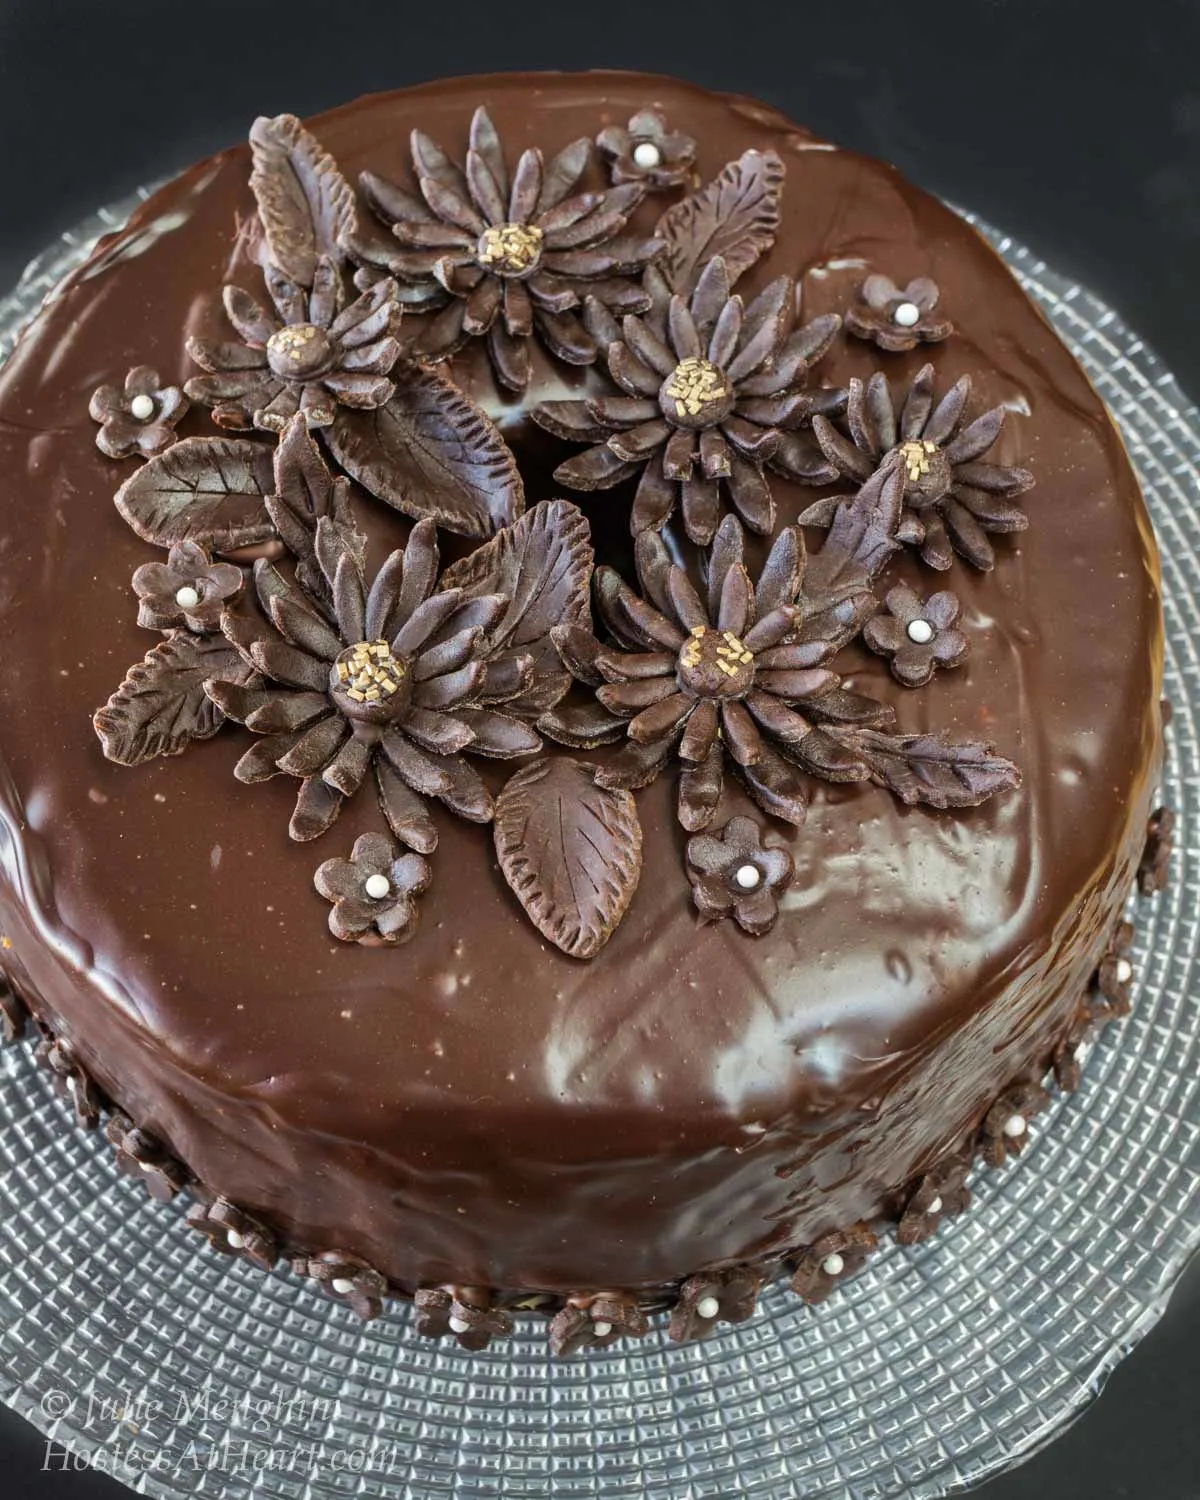 Bakers Brothers' Chocolate Cake Recipe | Yummly